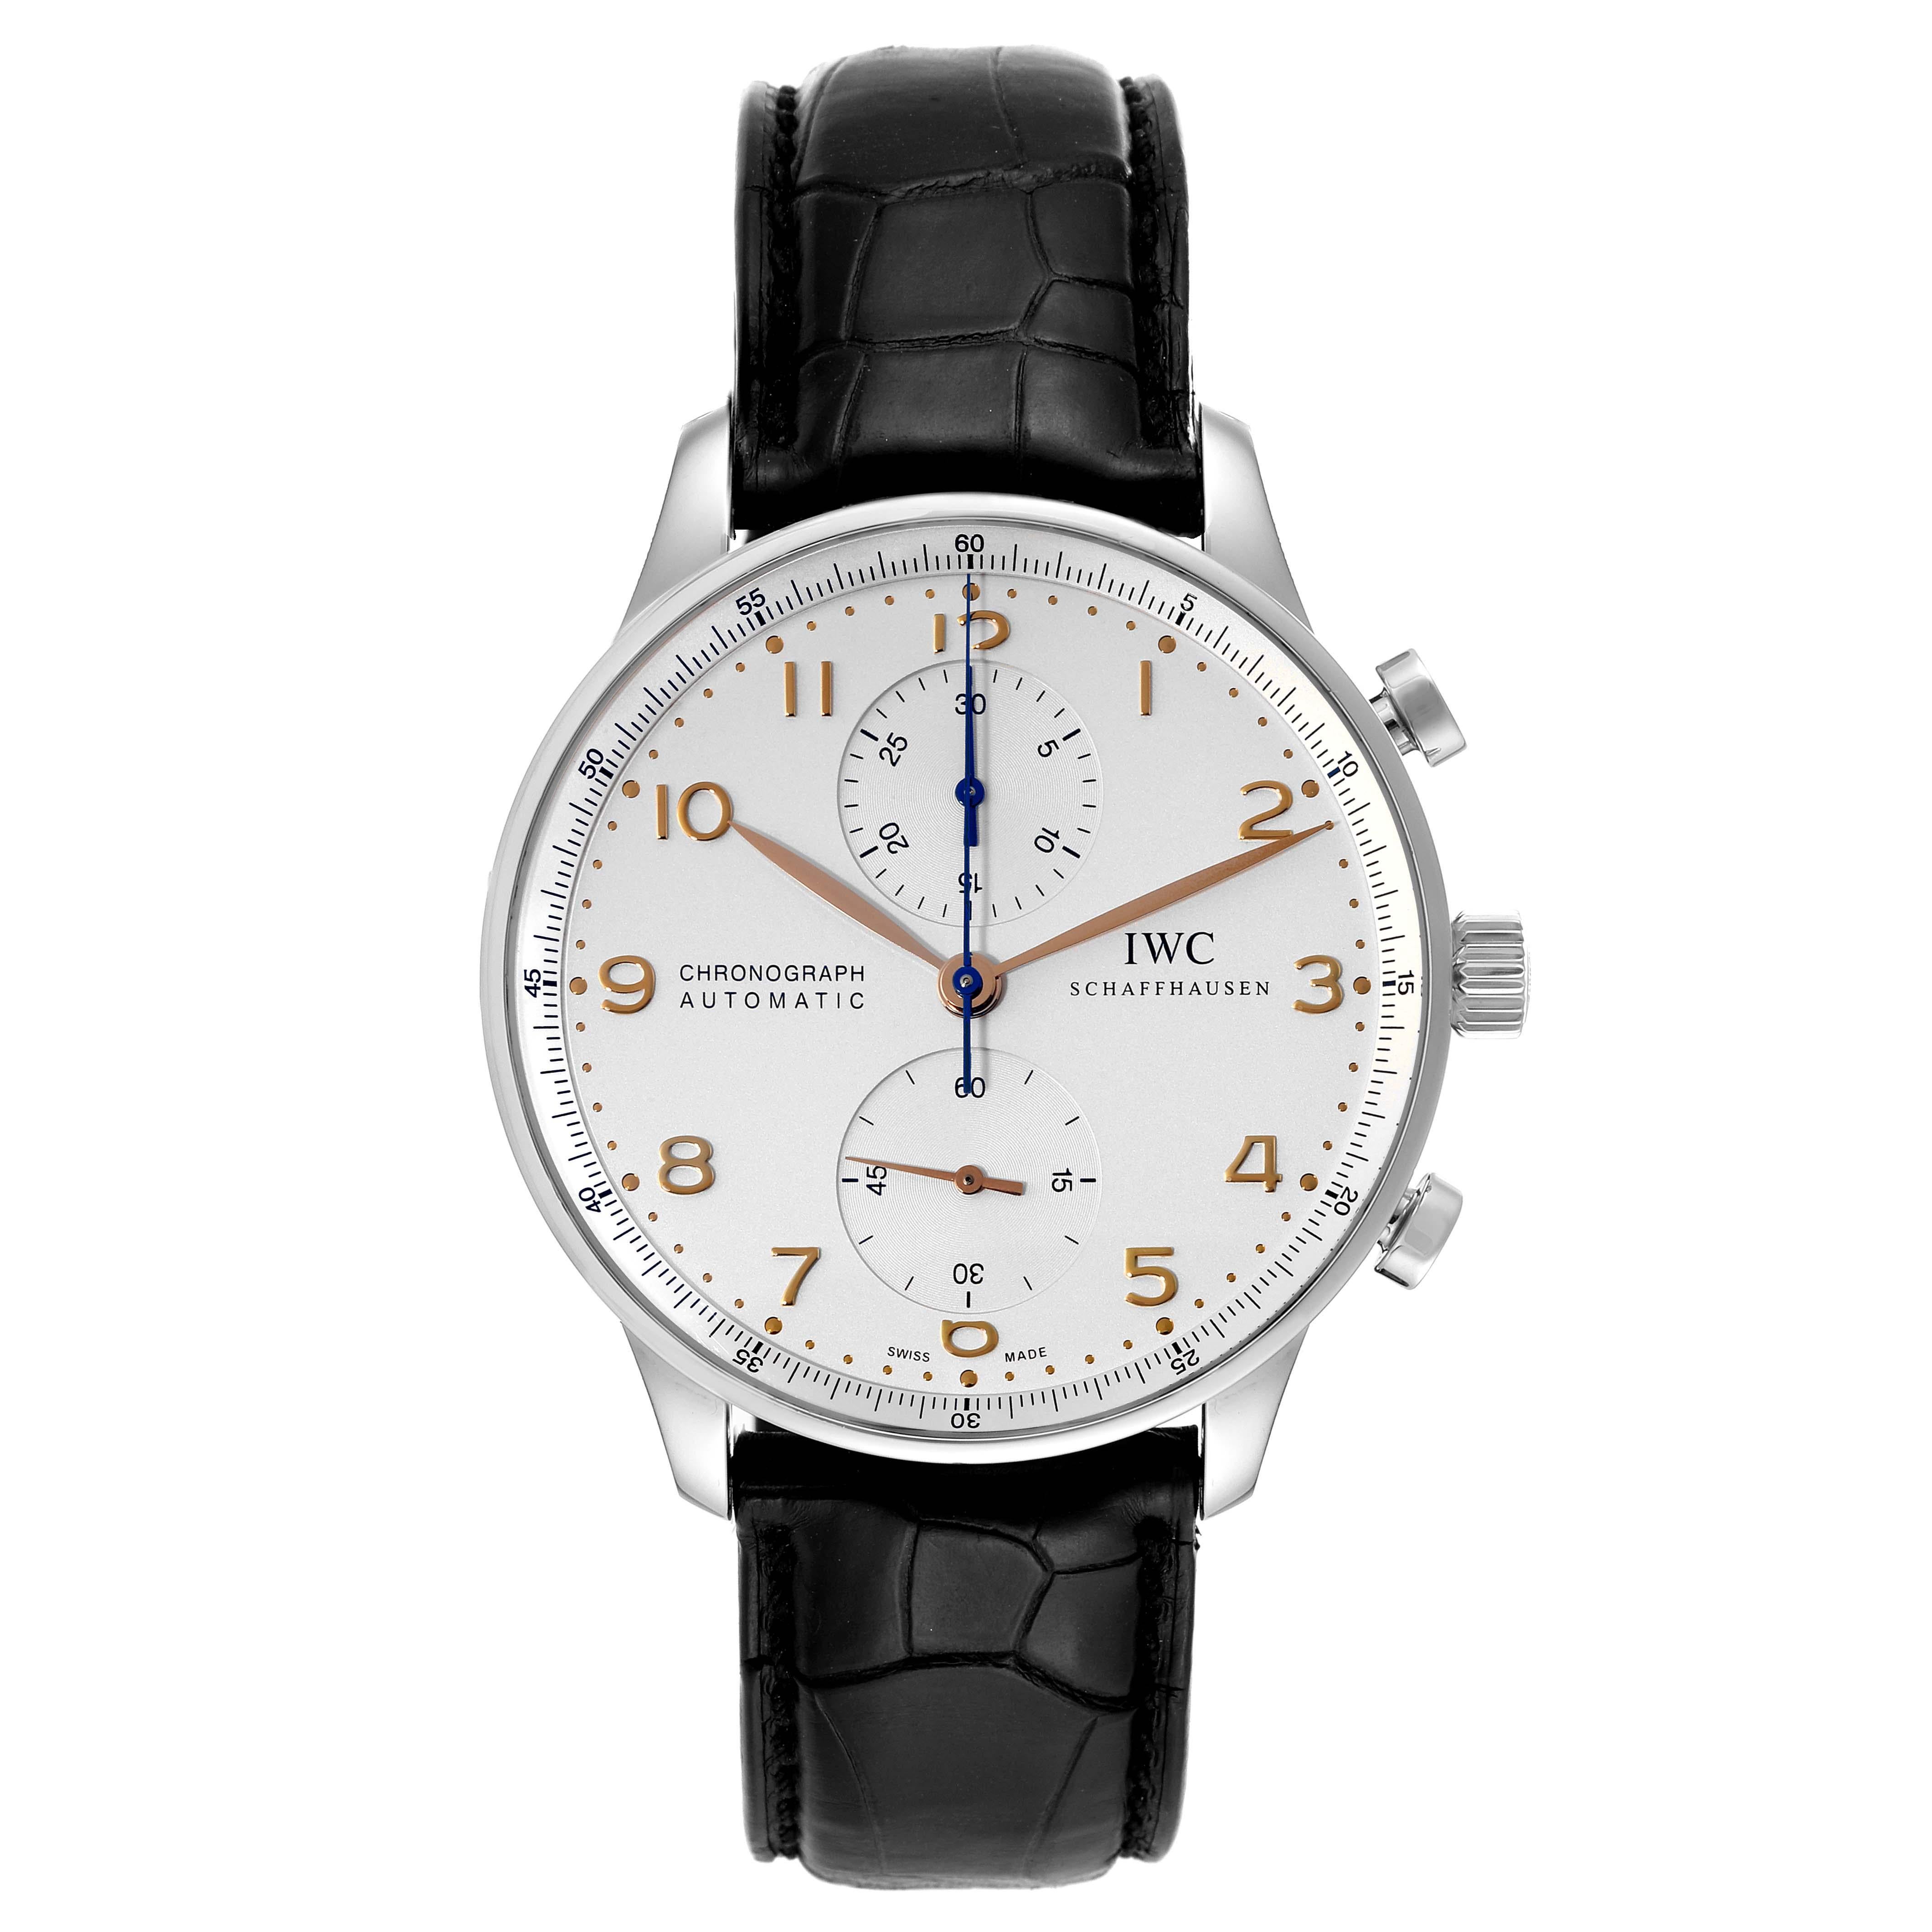 IWC Portuguese Chronograph Silver Dial Steel Mens Watch IW371401 Box Card. Automatic self-winding chronograph movement. Stainless steel case 40.9 mm in diameter. . Scratch resistant sapphire crystal. Silvered dial with raised rose gold Arabic